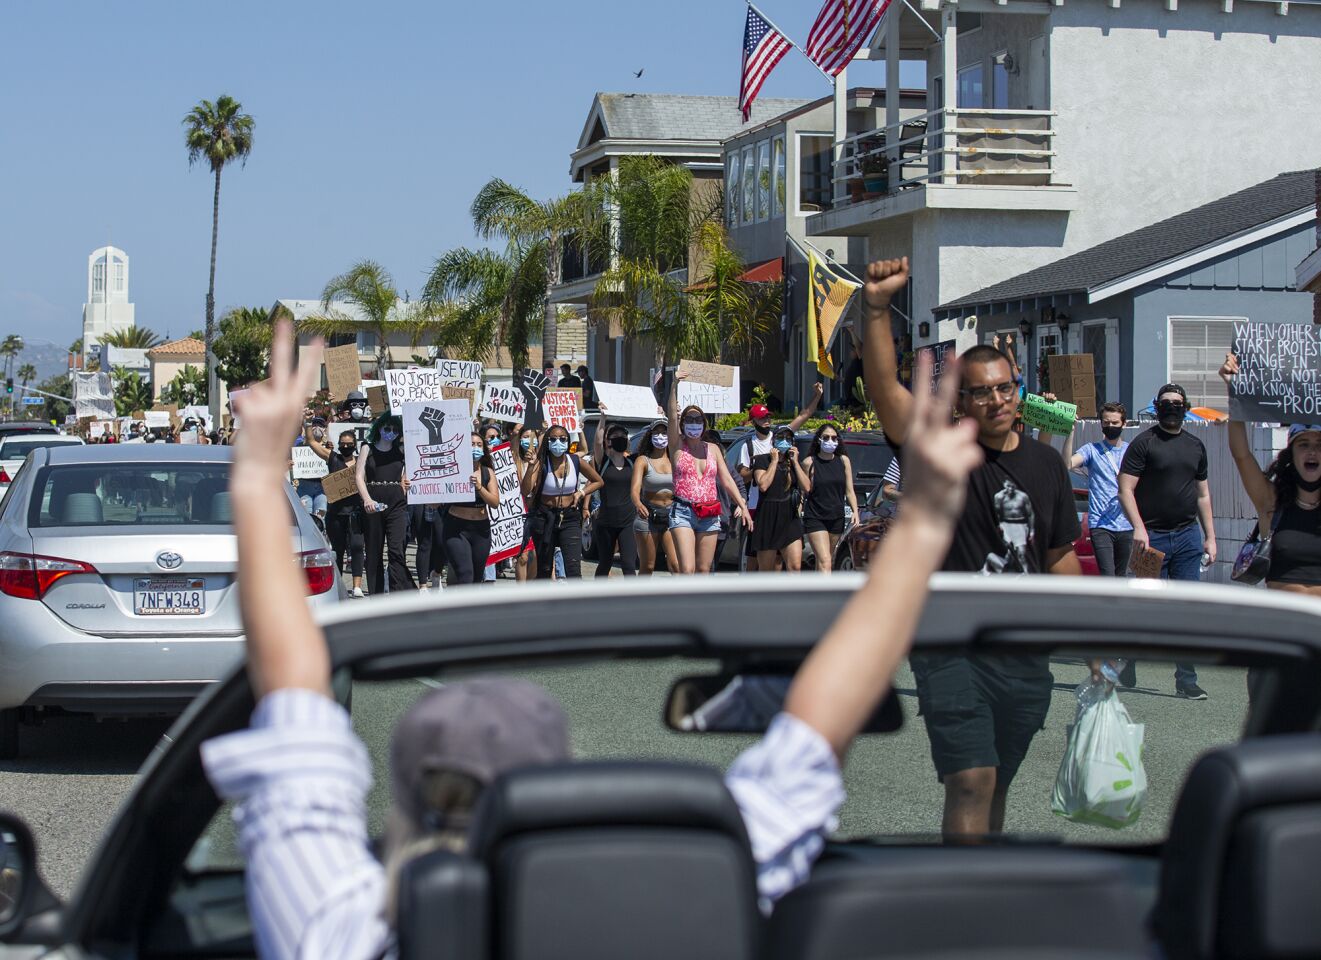 Demonstrators walk down Balboa Boulevard as a passing motorist flashes peace signs on Wednesday.